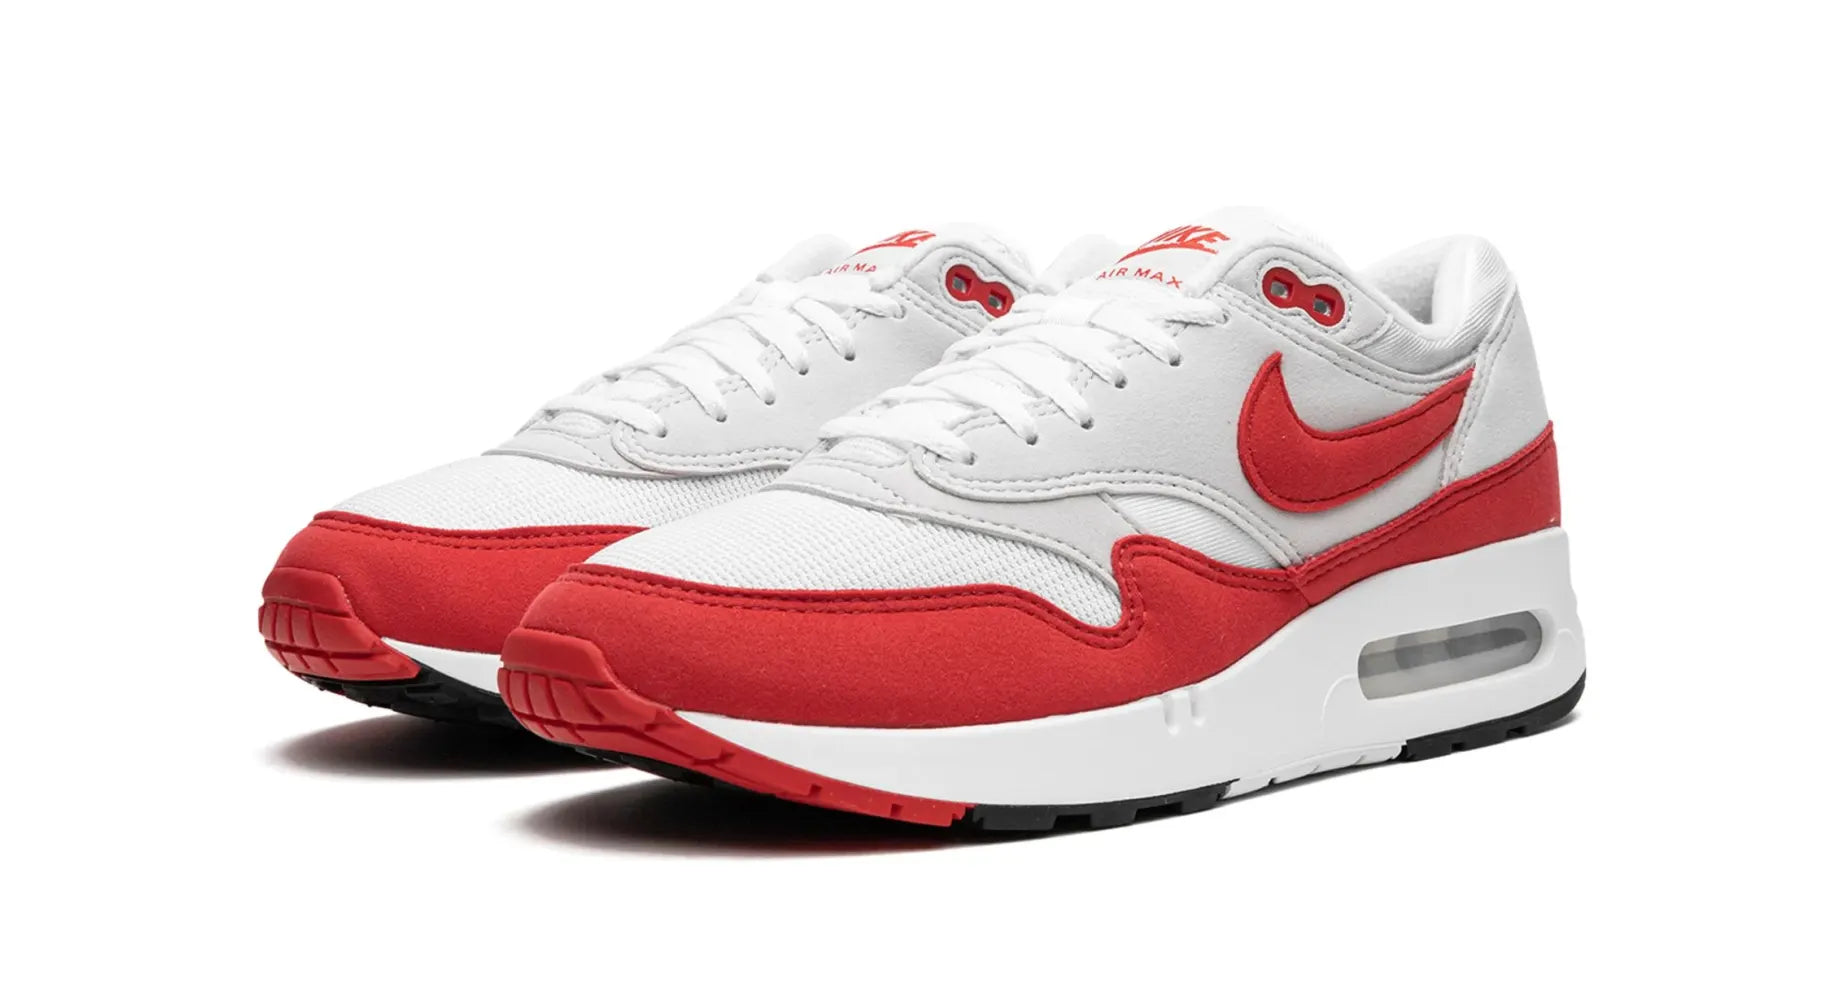 Nike Air Max 1 '86 OG Big Bubble Sport Red